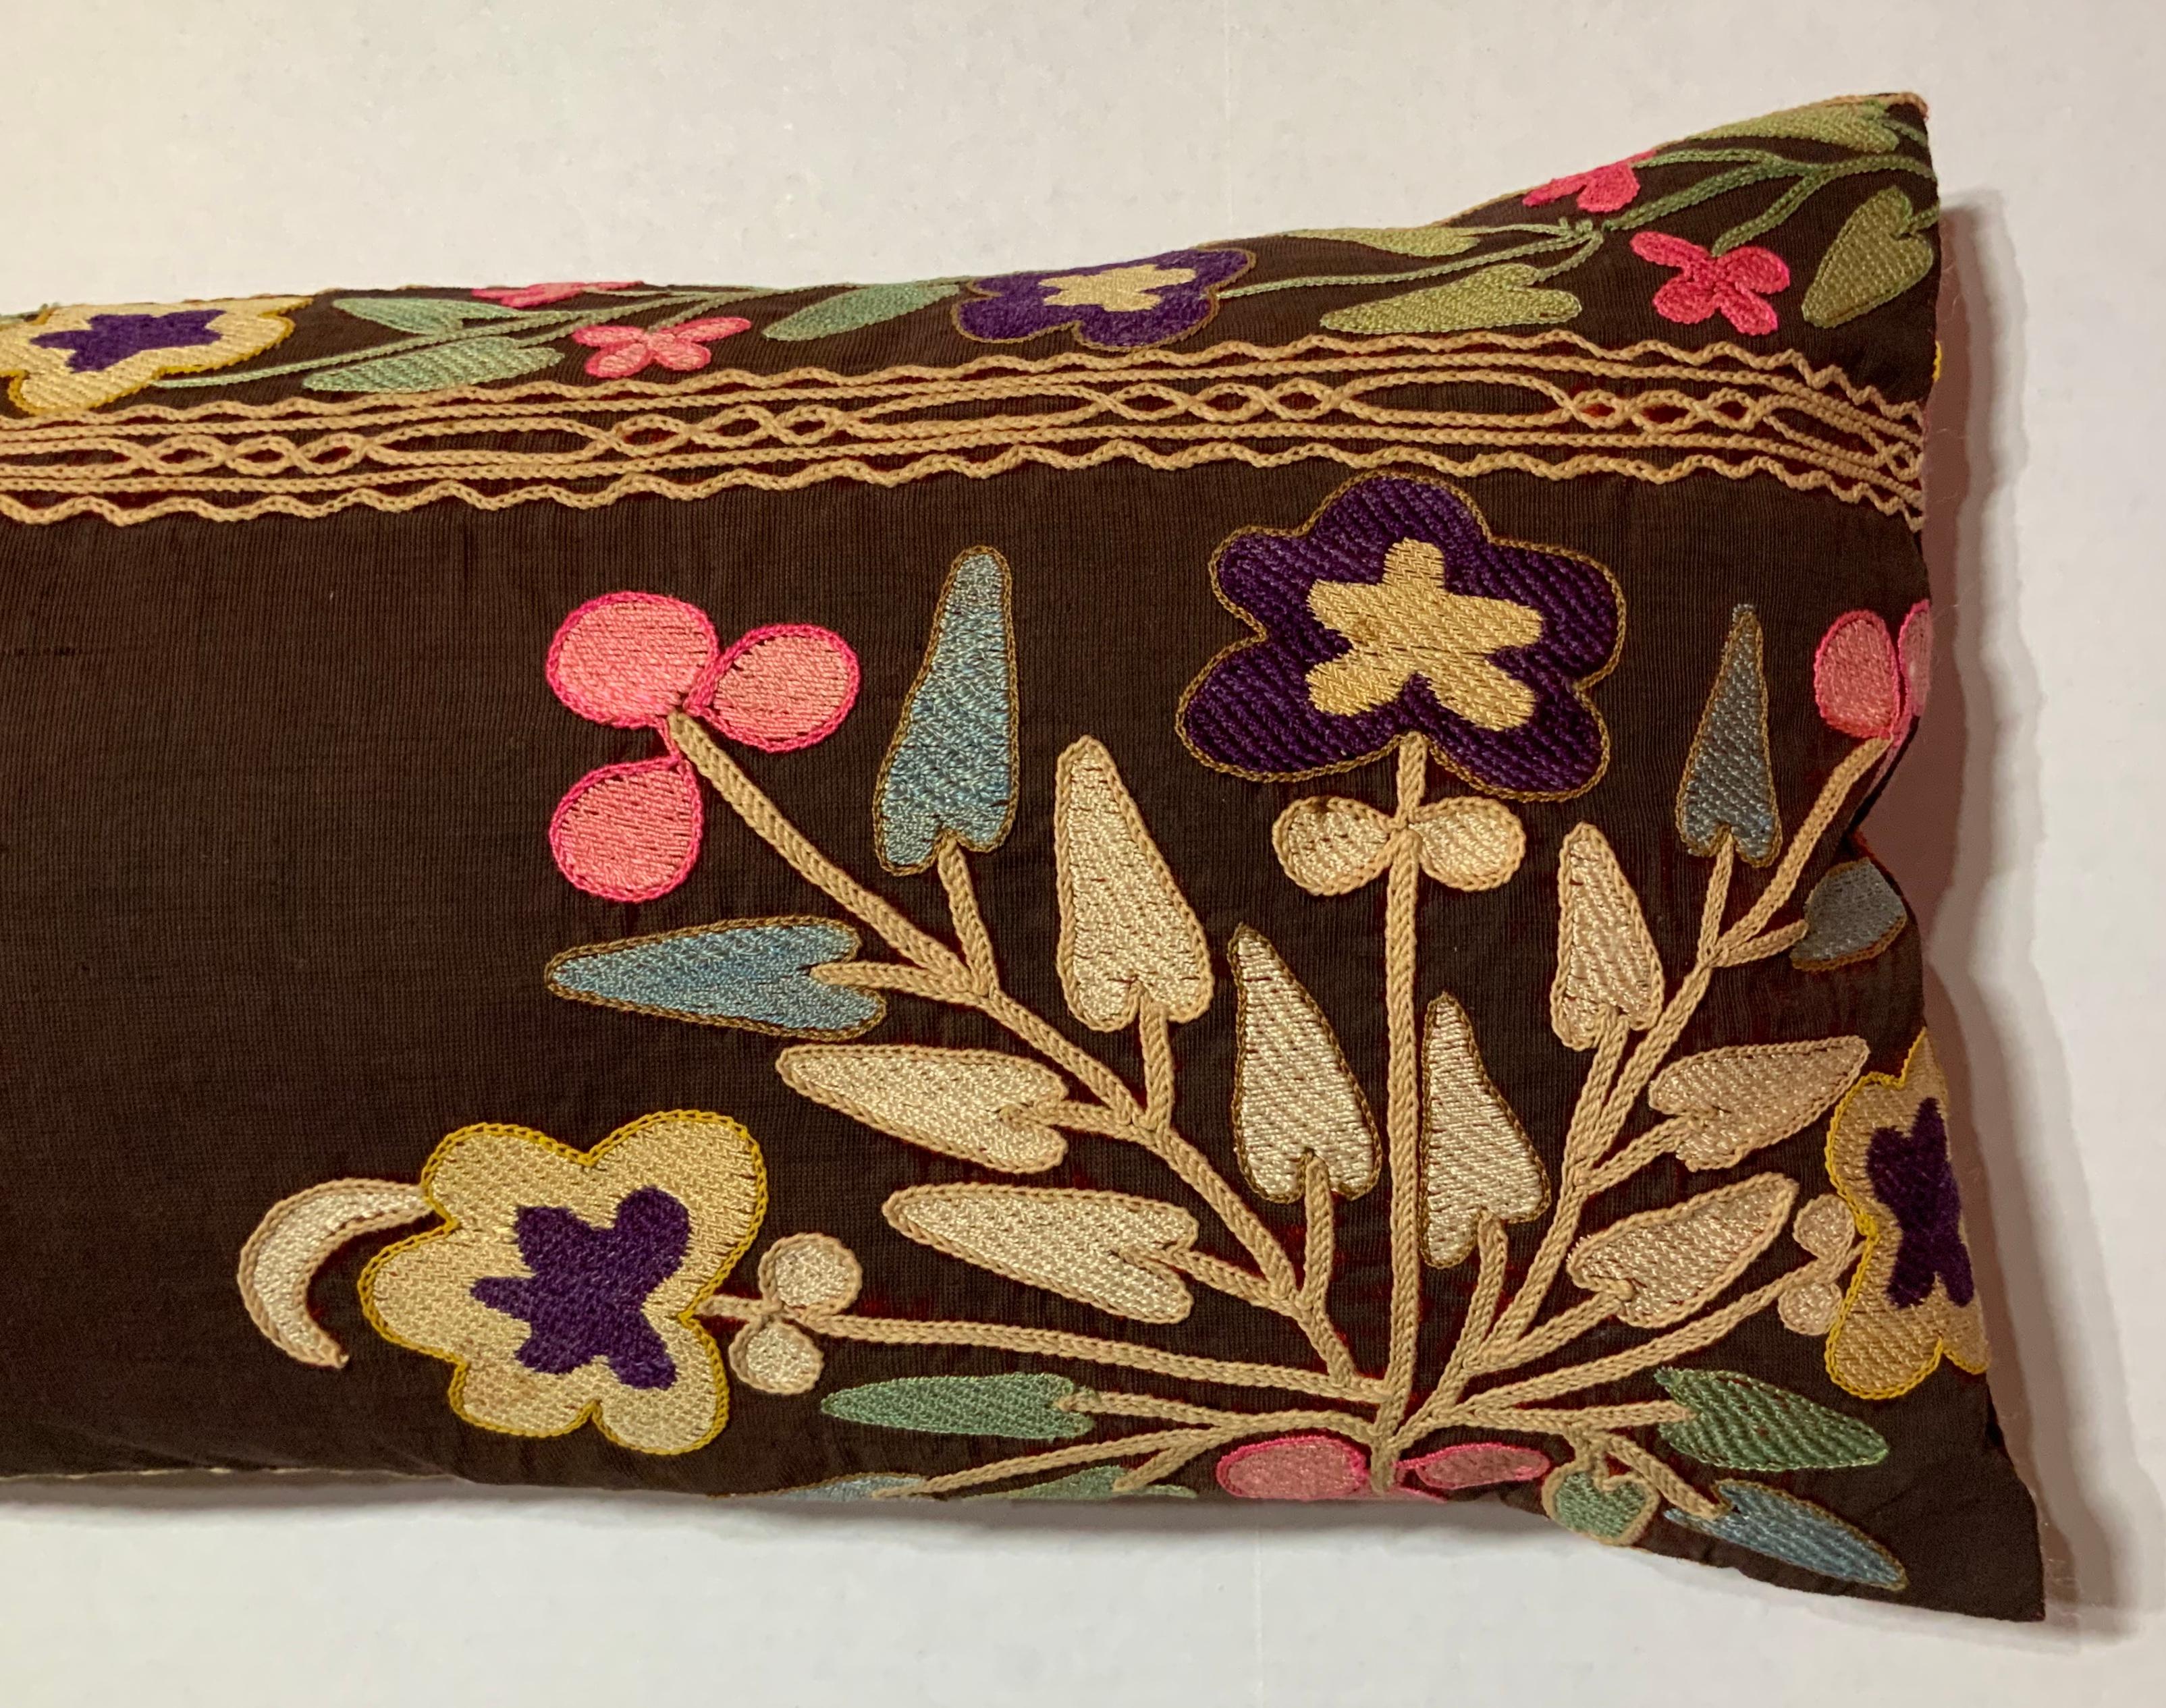 Exceptional pillow made of antique hand embroidery Suzani fragment, beautiful colors of vine and floral motifs all embroidered on an antique oxidized wine color velvet. Quality backing, frash inserts. Great for room decoration.
            